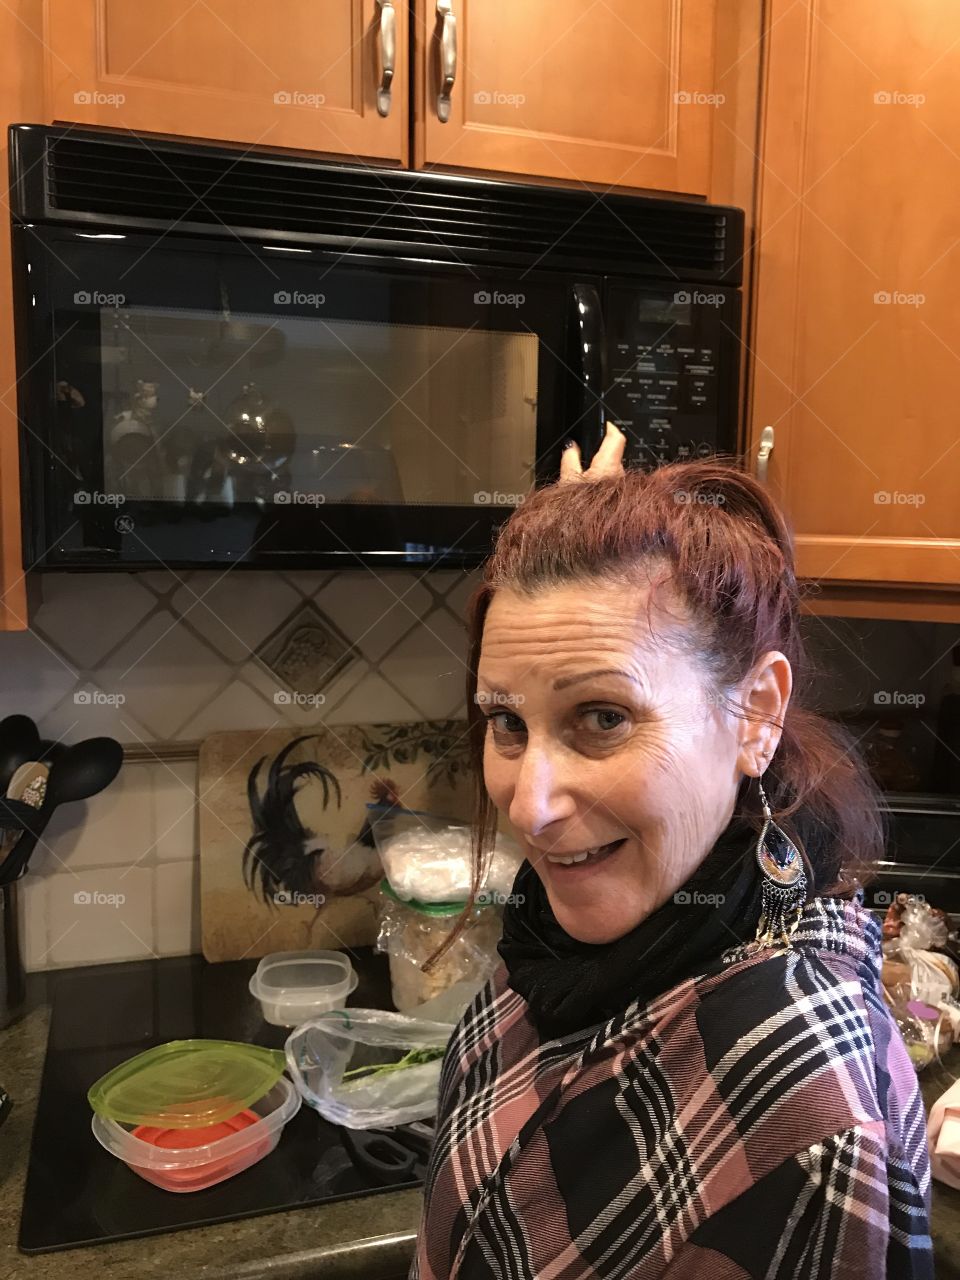 Woman in kitchen holding microwave handle